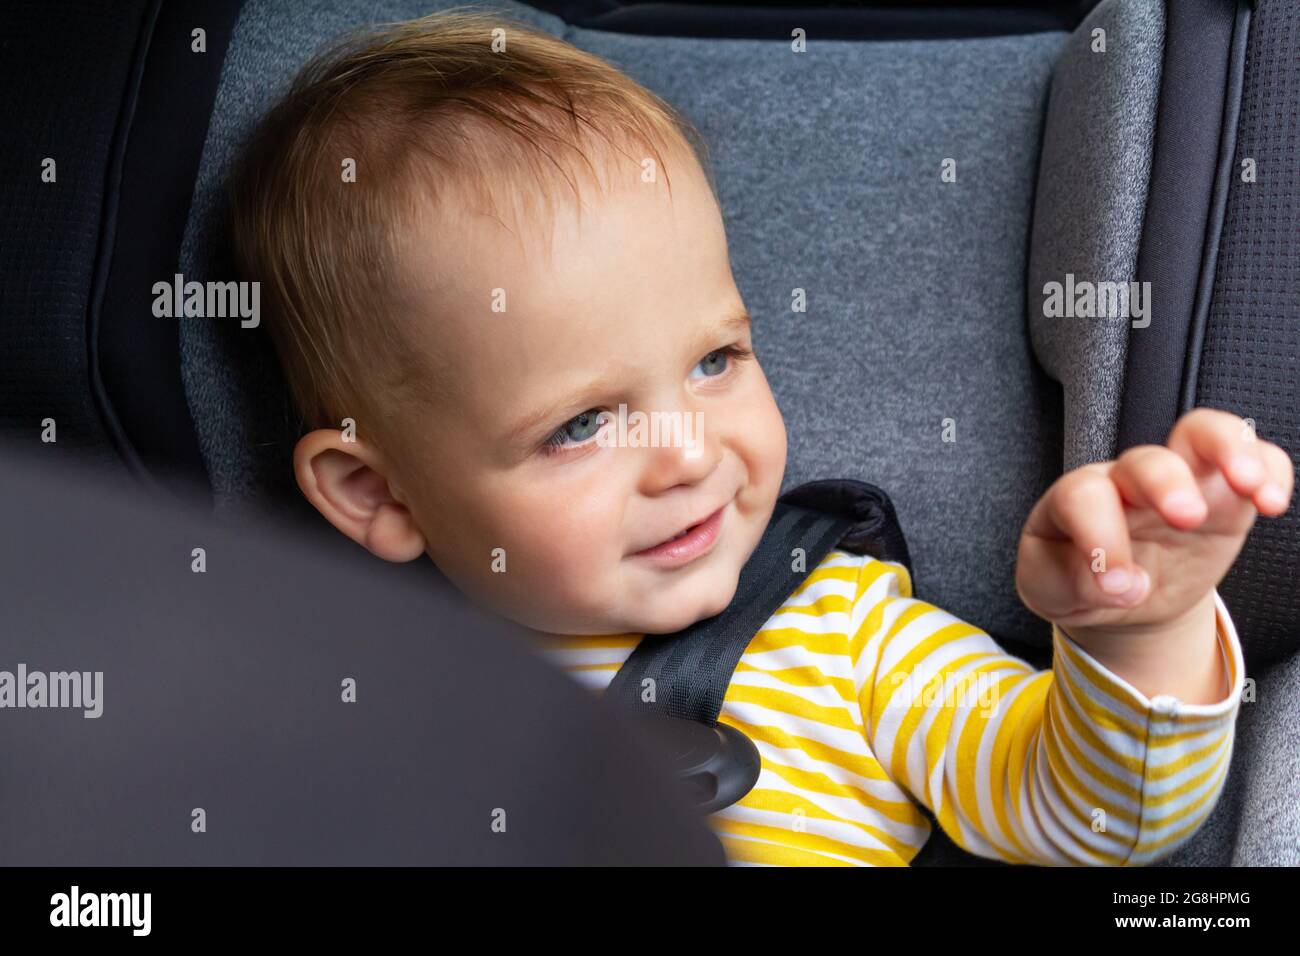 Baby in car seat goodbye before leaving. Stock Photo